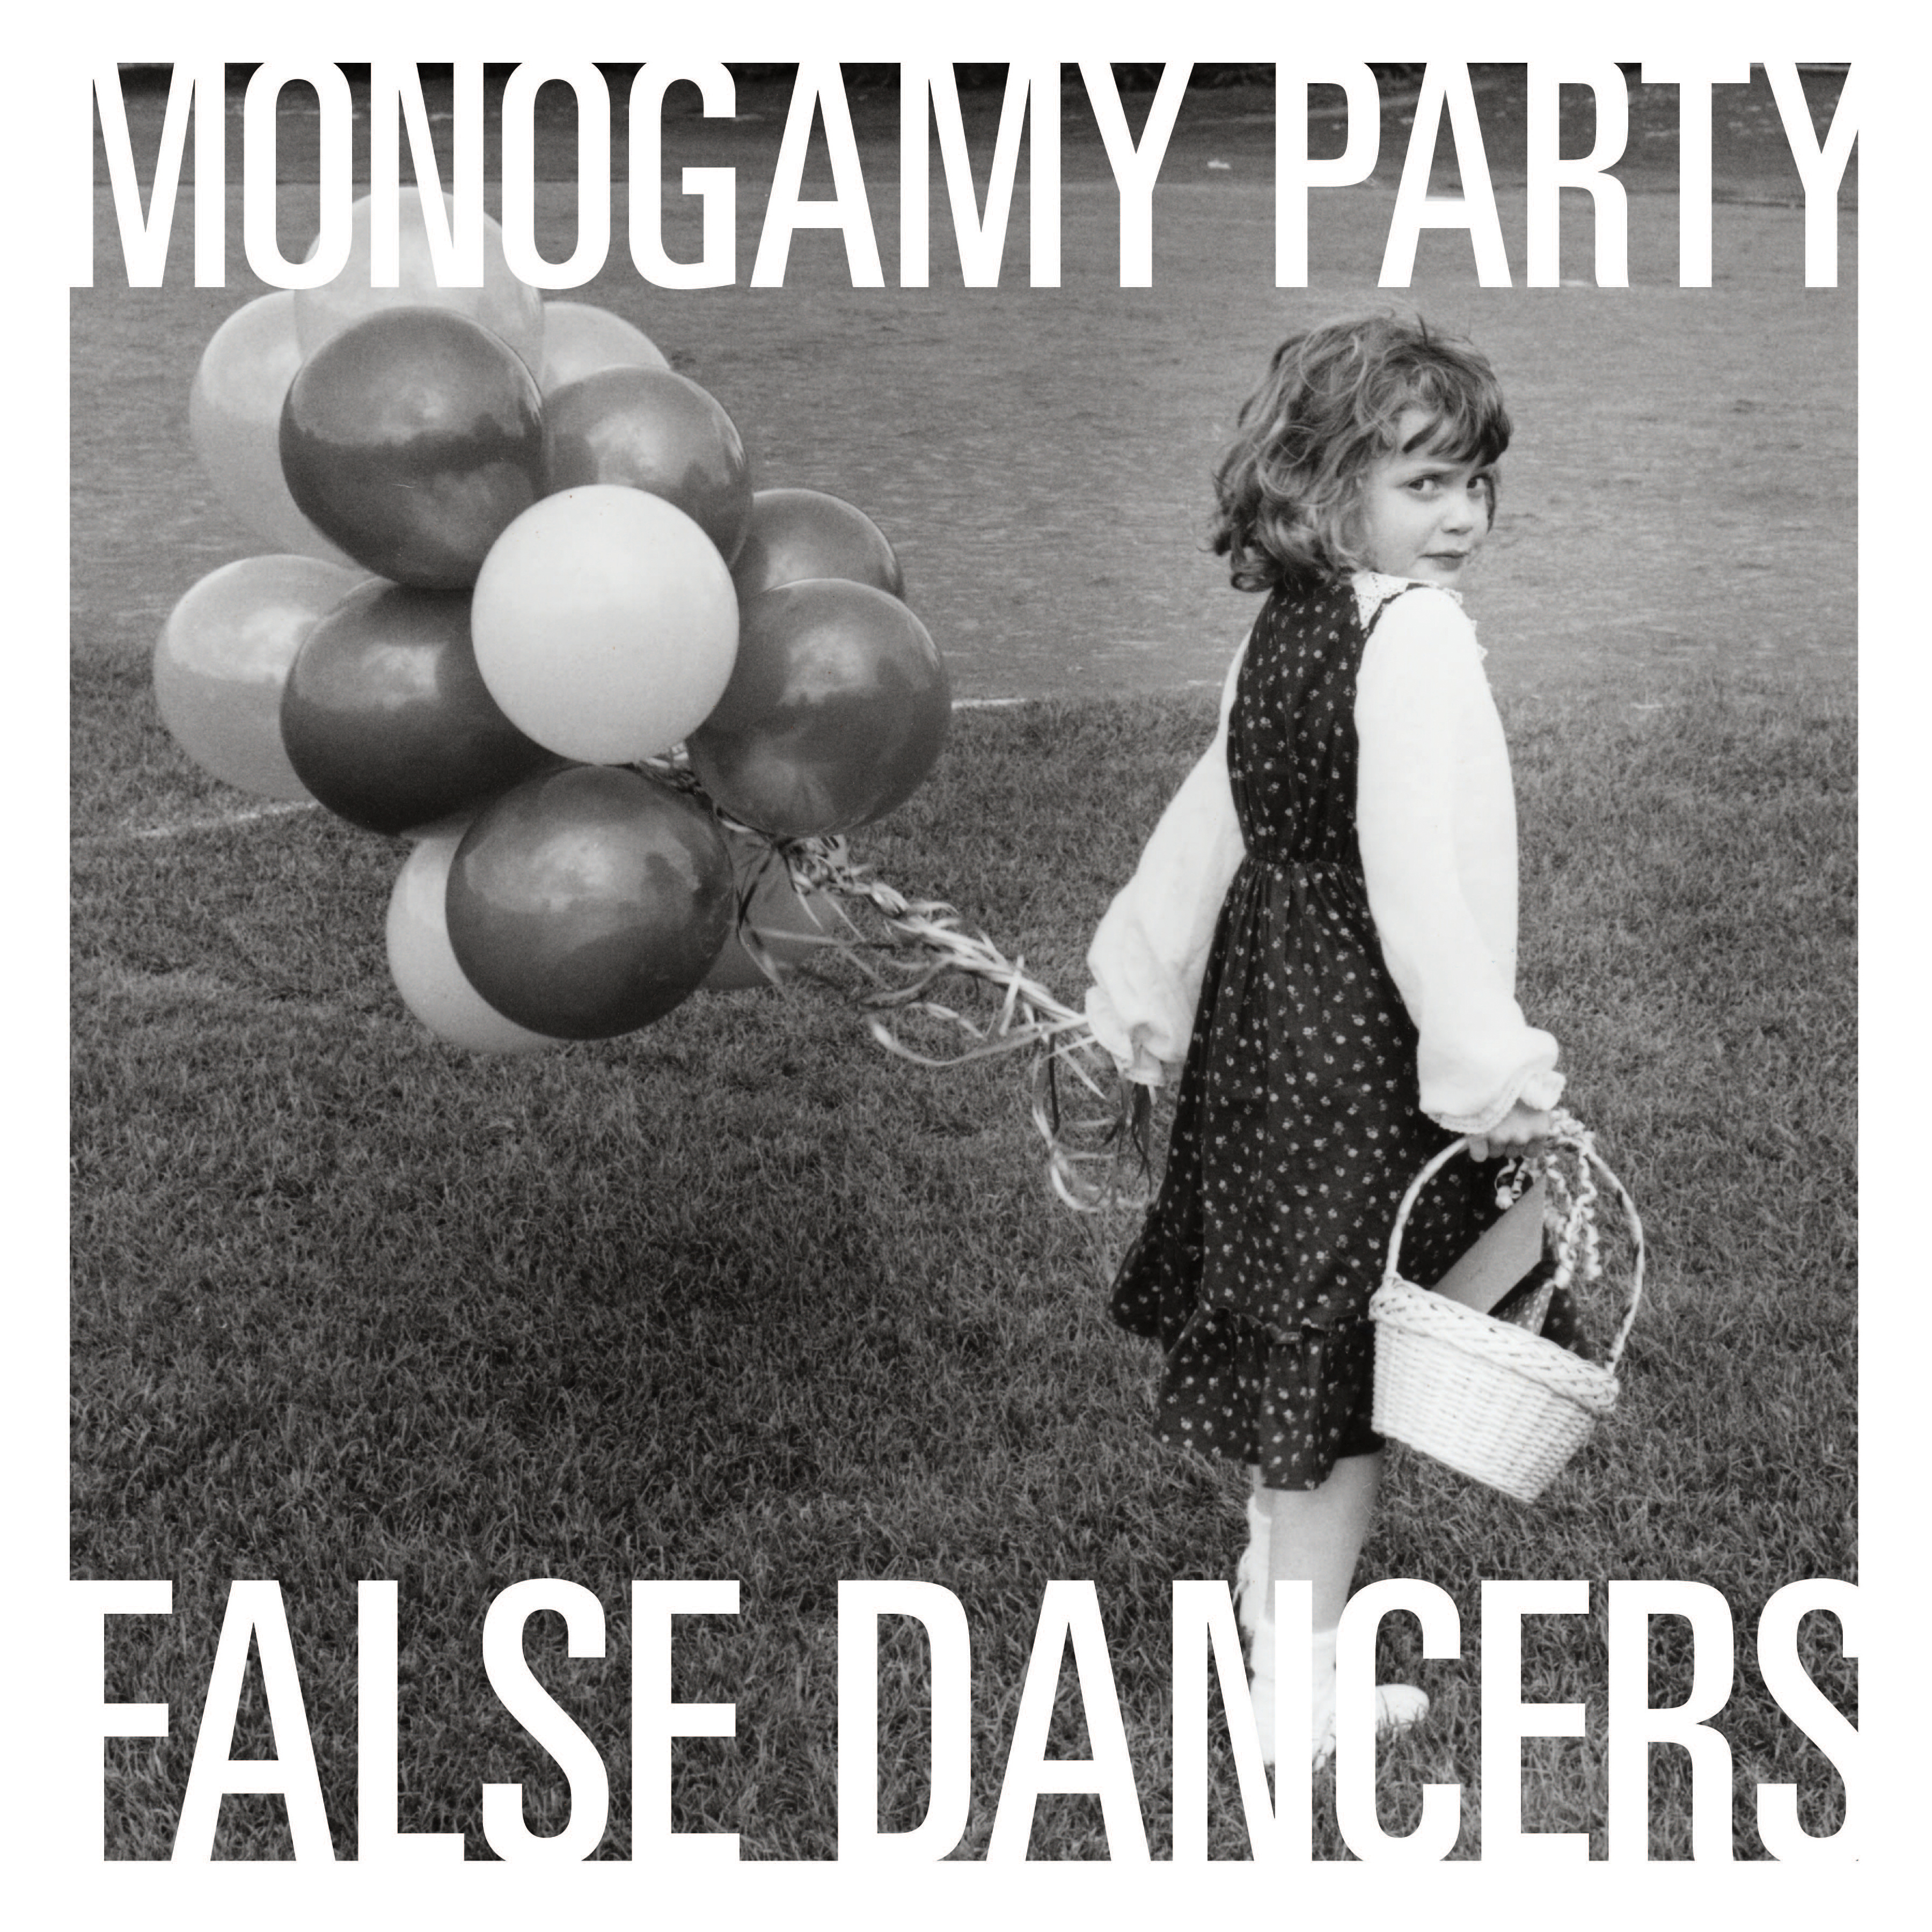 Seeing Monogamy Party perform is kind of like being hit in the